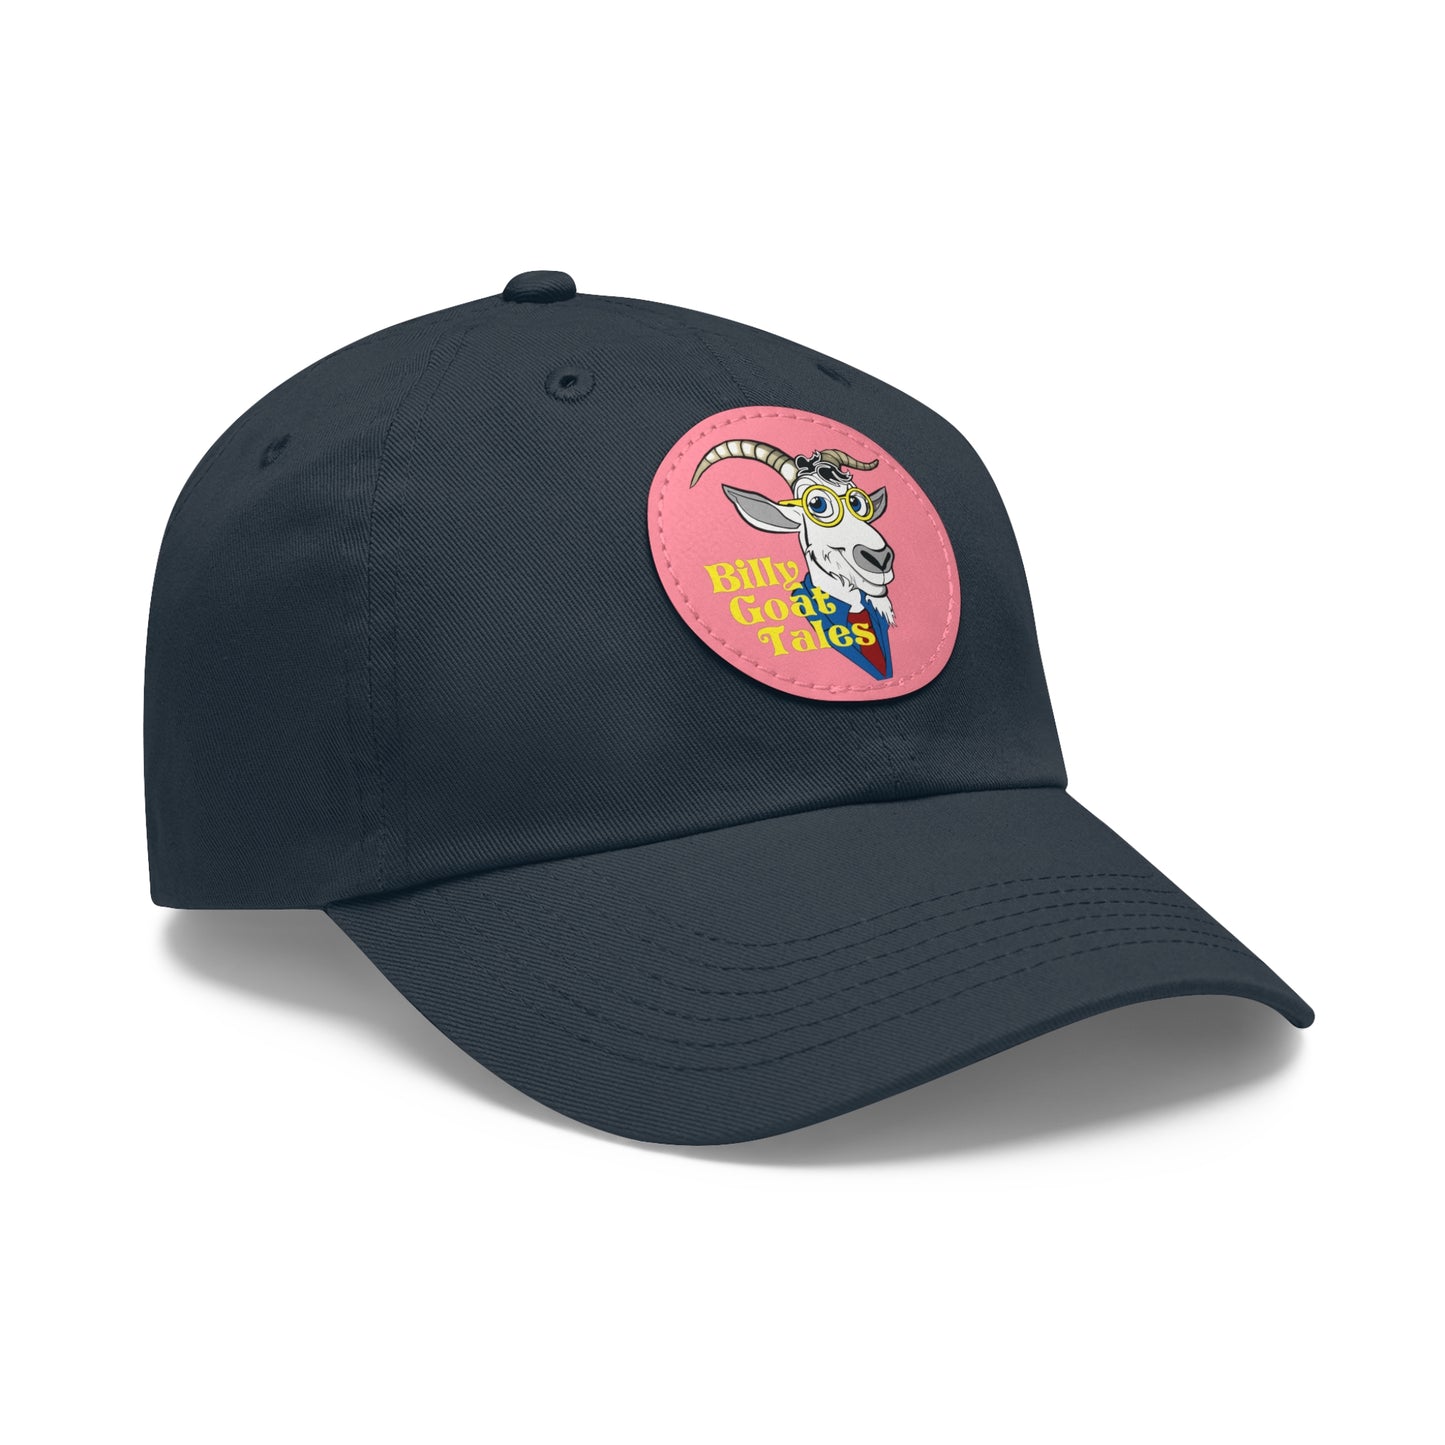 Billy Goat Taled Dad Hat with Leather Patch